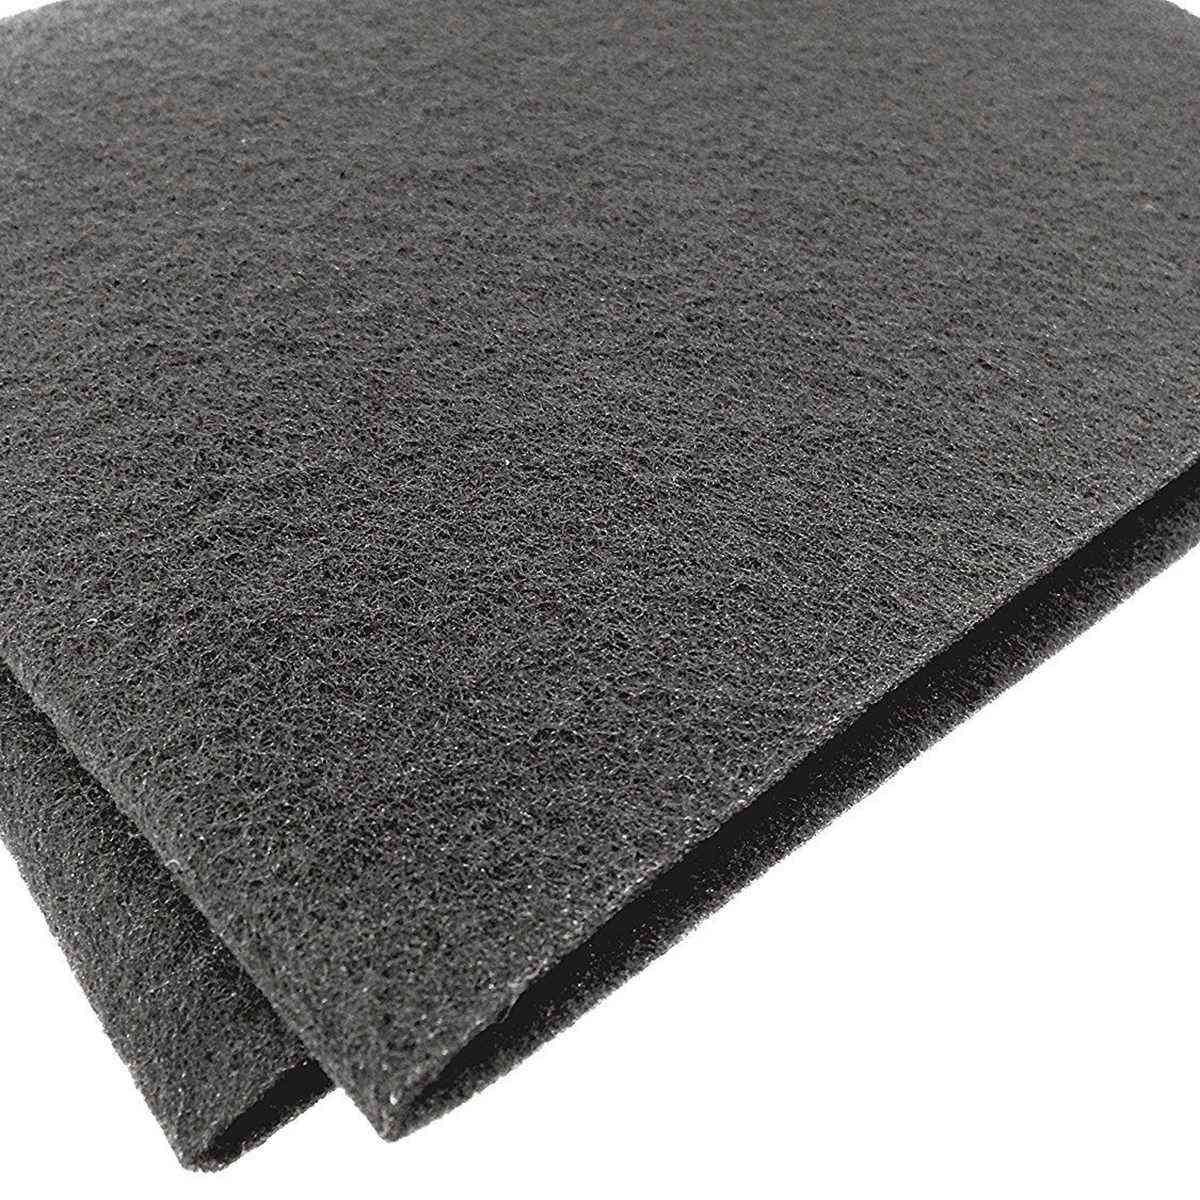 Carbon Cooker Hood Filter Cut To Size Charcoal Vent Filters For All Hoods